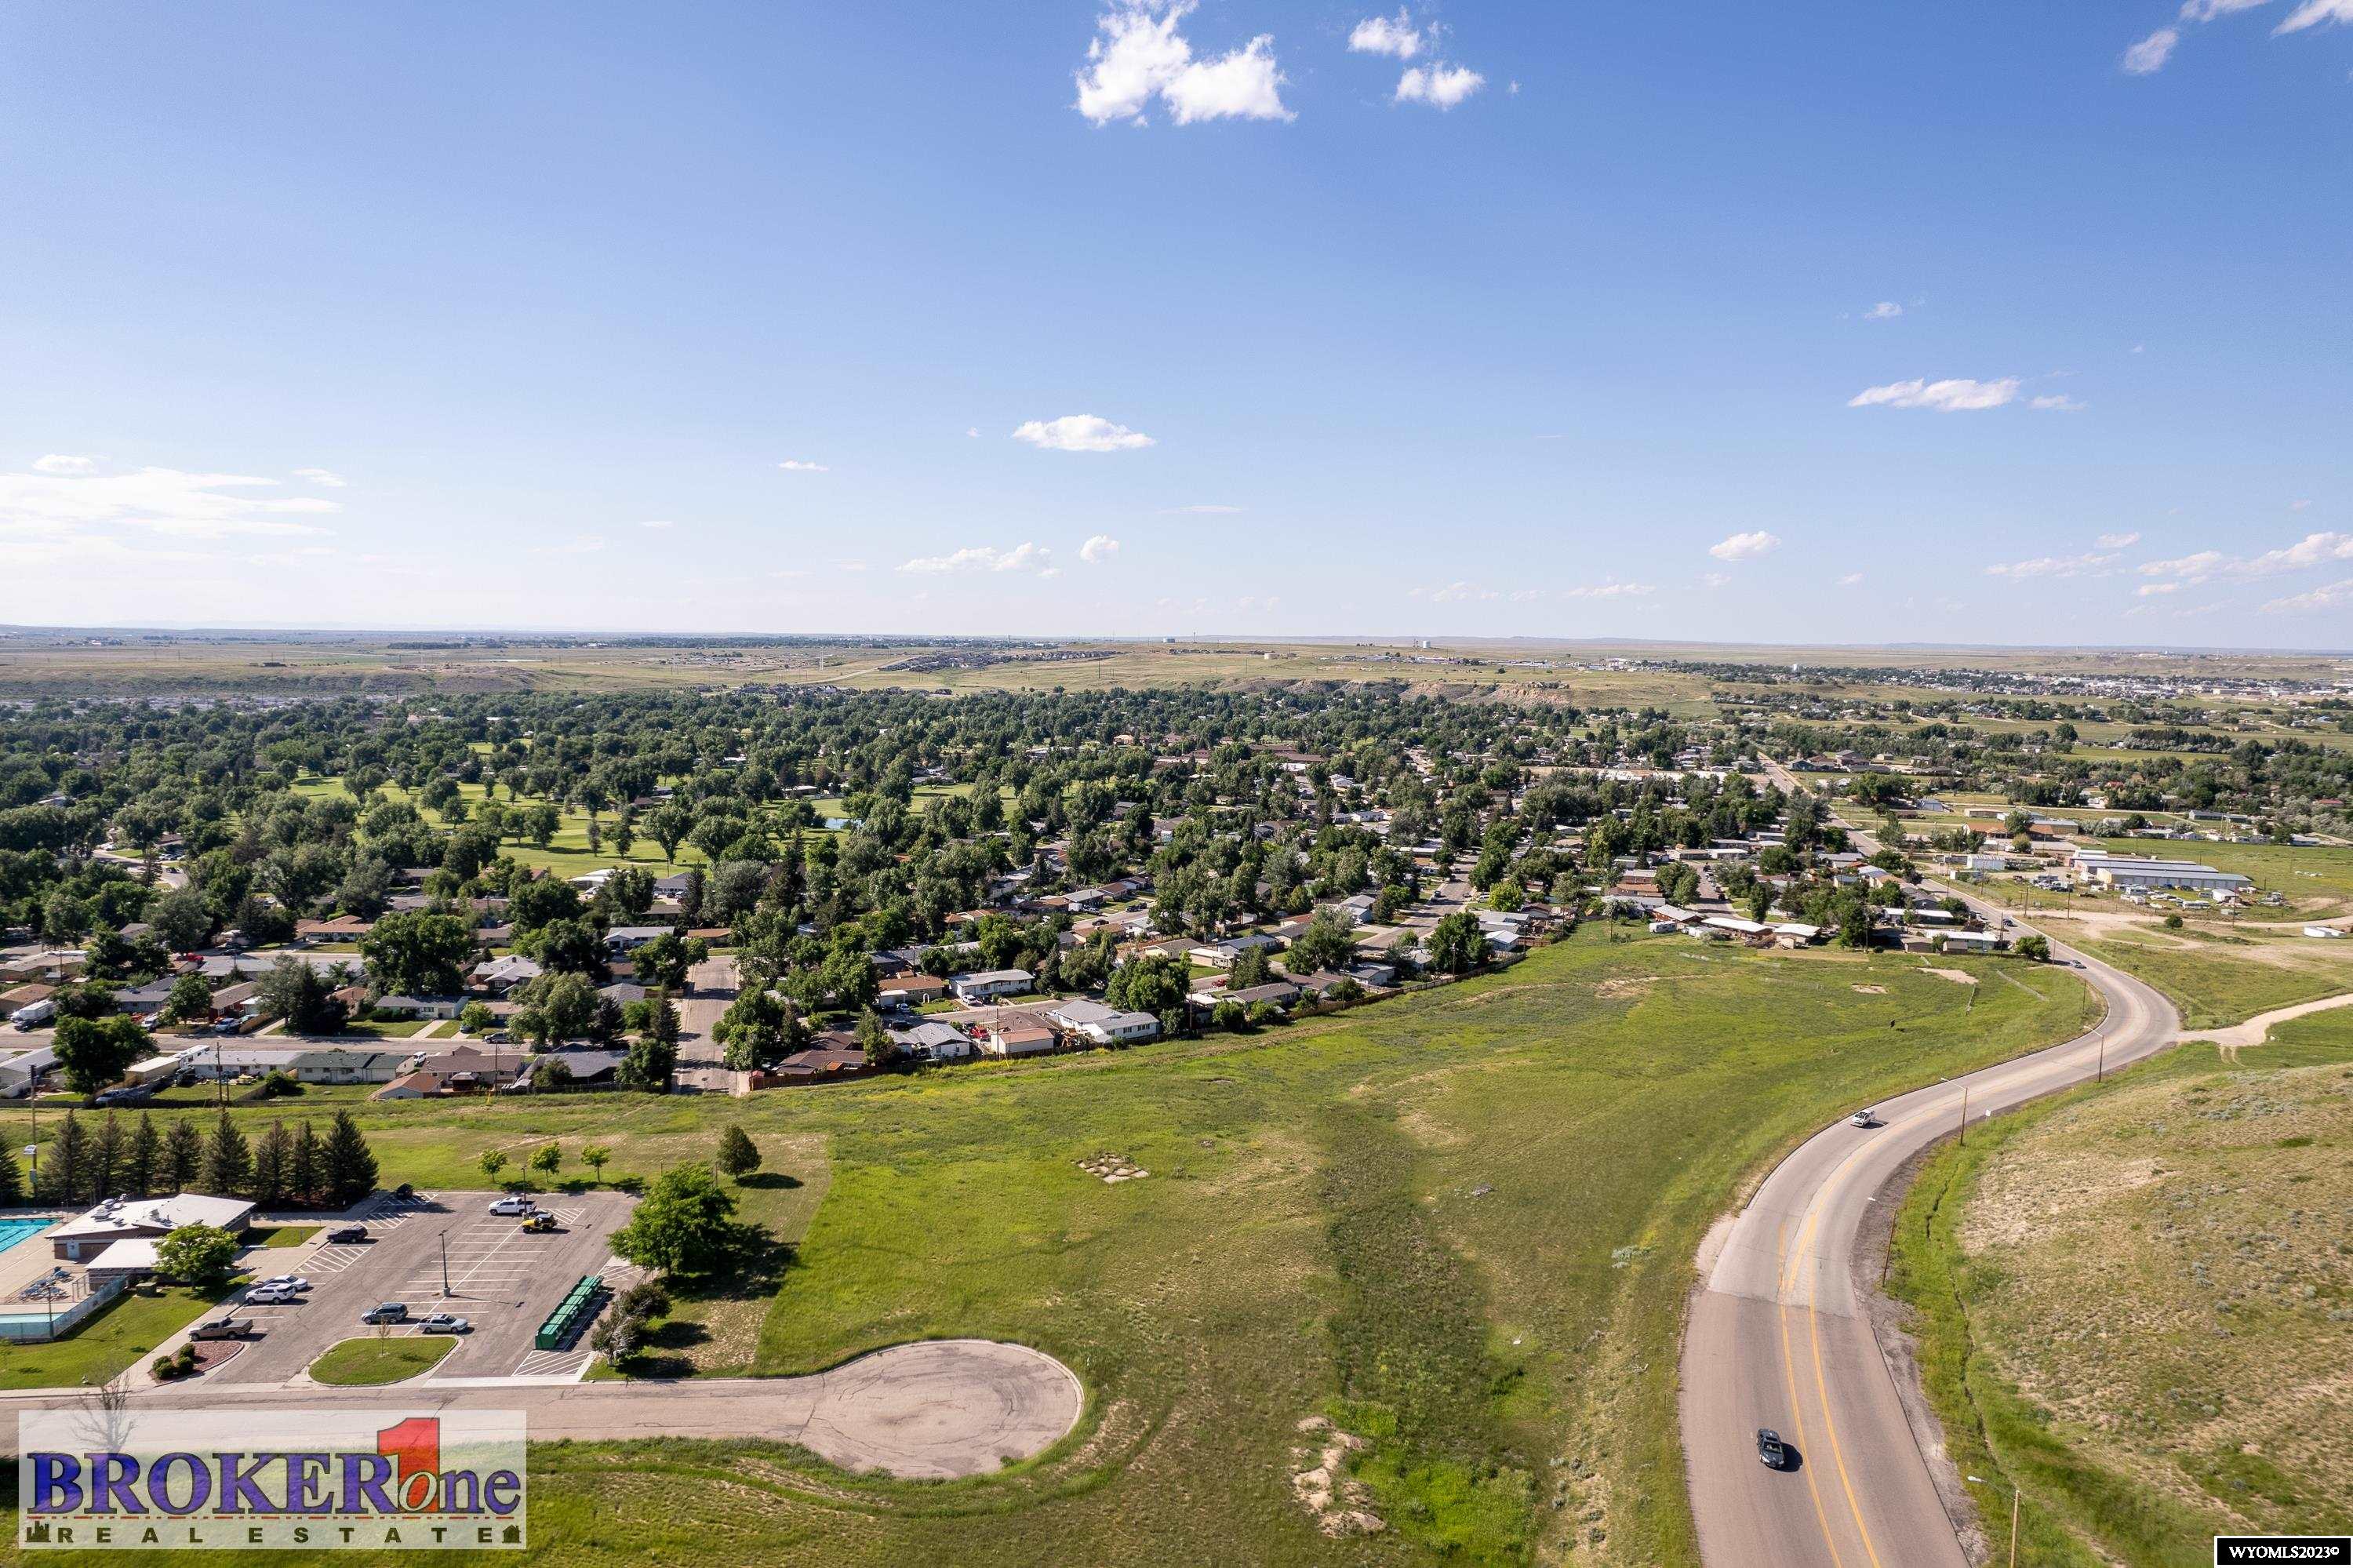 Type "A" business opportunity and Location. Currently zoned C2: General Business. Buyer may wish to work with the City of Casper Planning Department to change use and/or zoning. Public utilities available in the area. Taxes are based on land only.